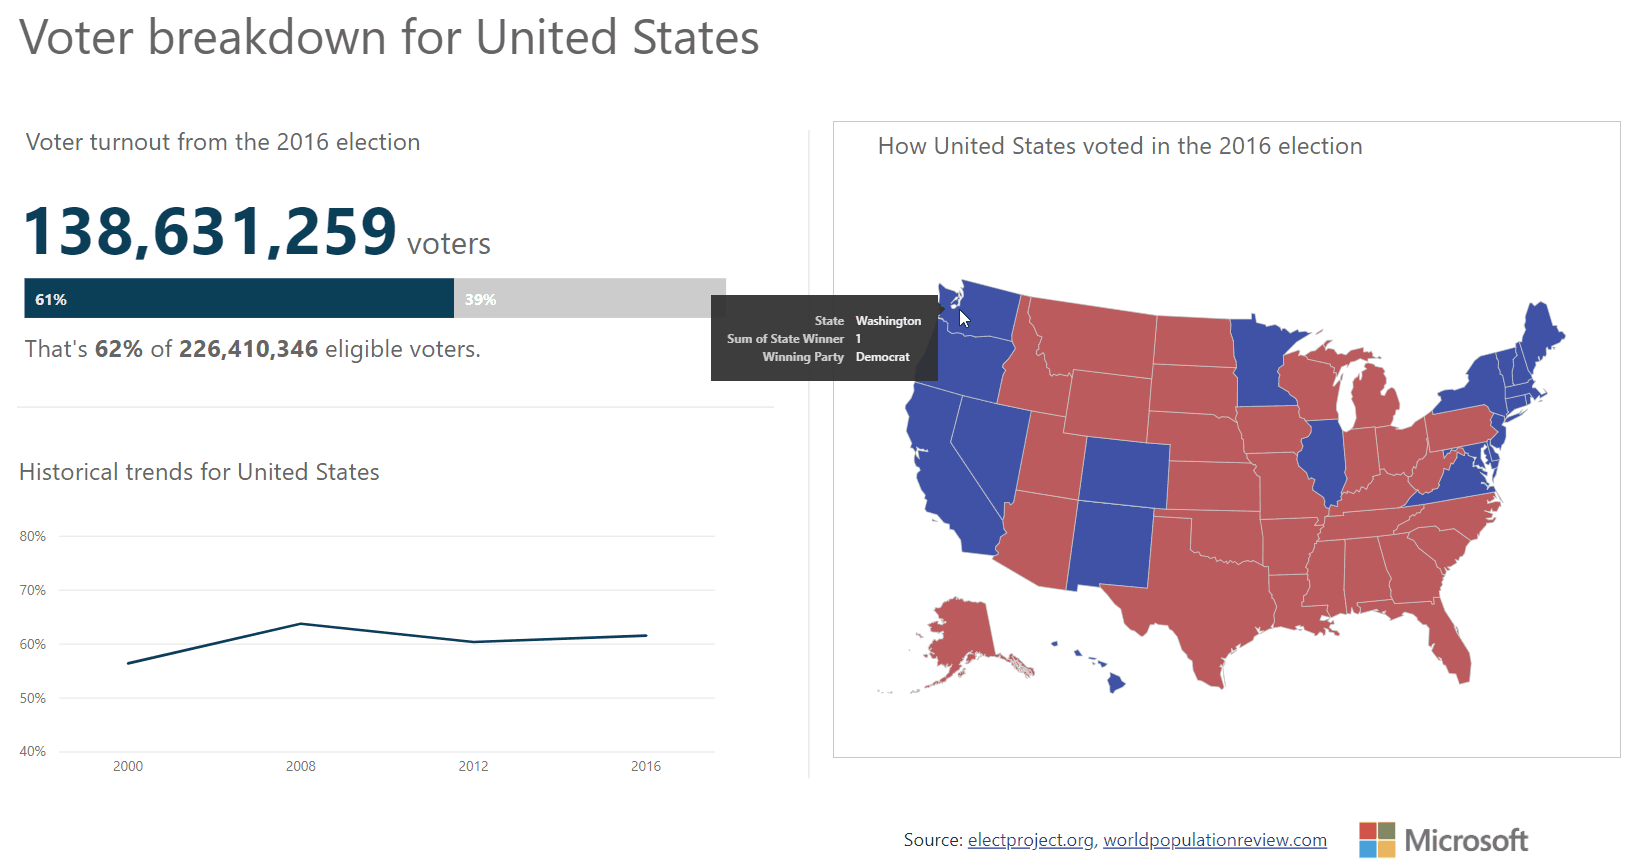 An animated GIF showing a map of the US and voter turnout in the 2016 election in various states